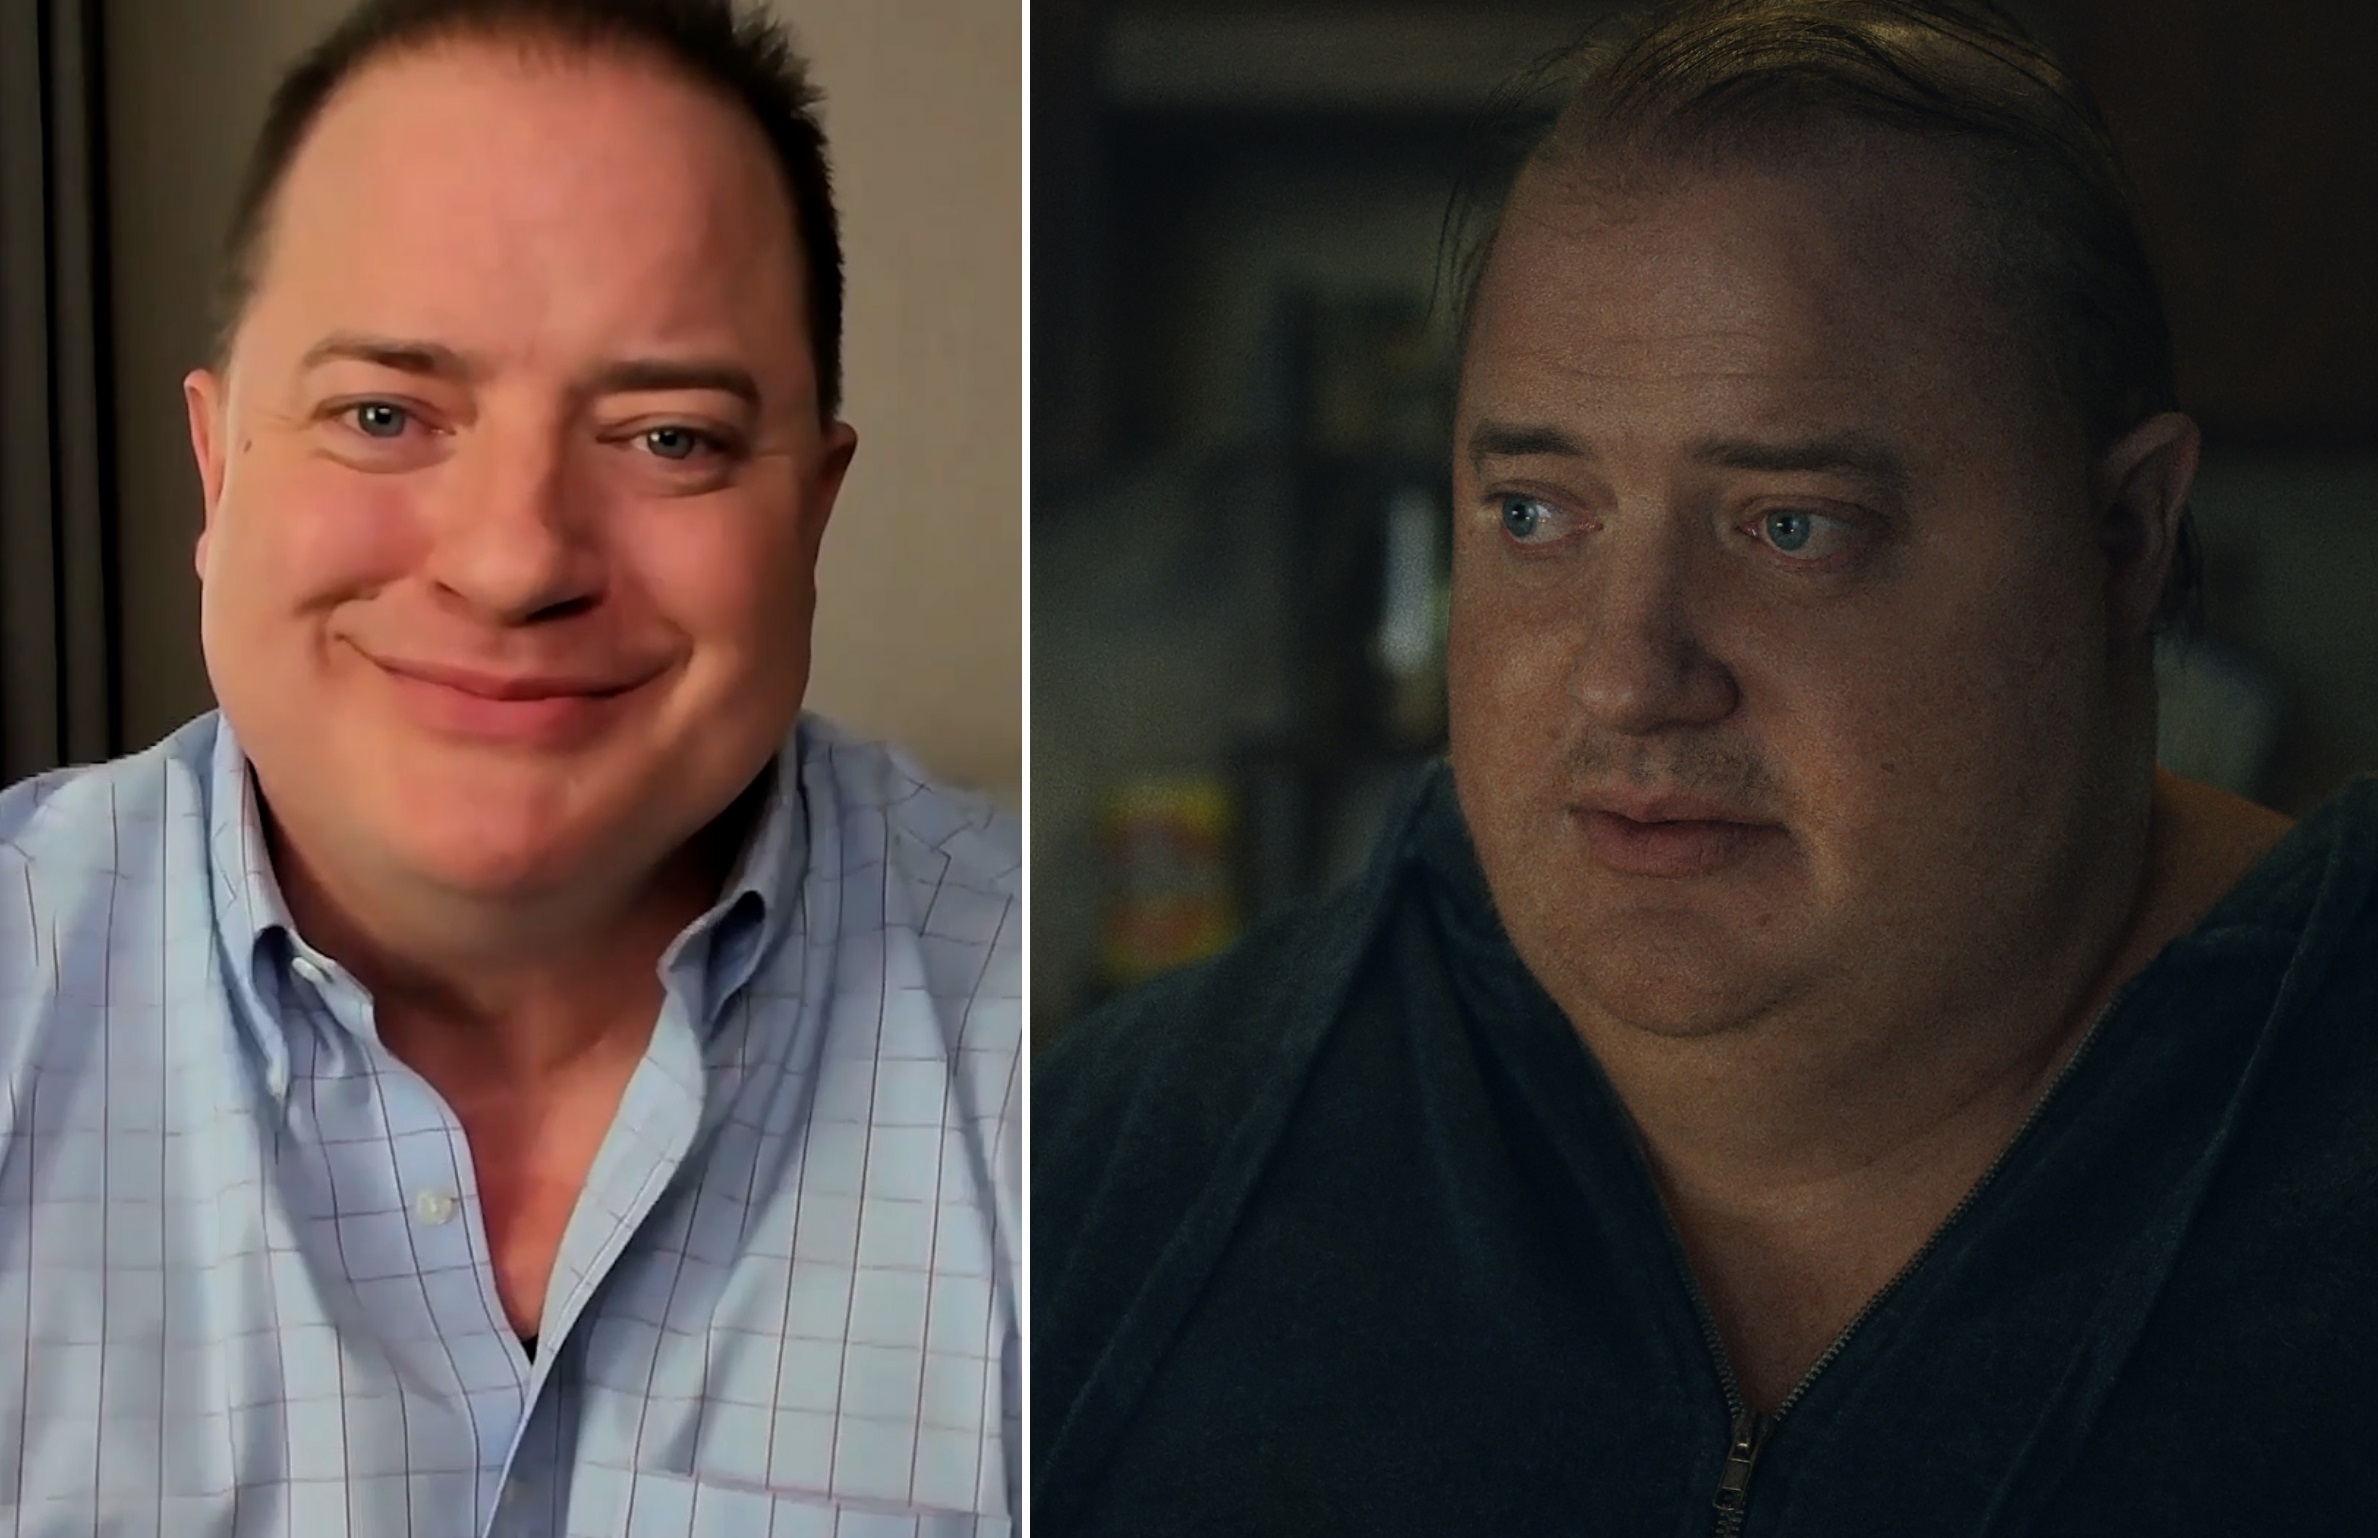 You are currently viewing Brendan Fraser in a ‘Fat Suit’ in ‘The Whale’ Preview Divides Opinions